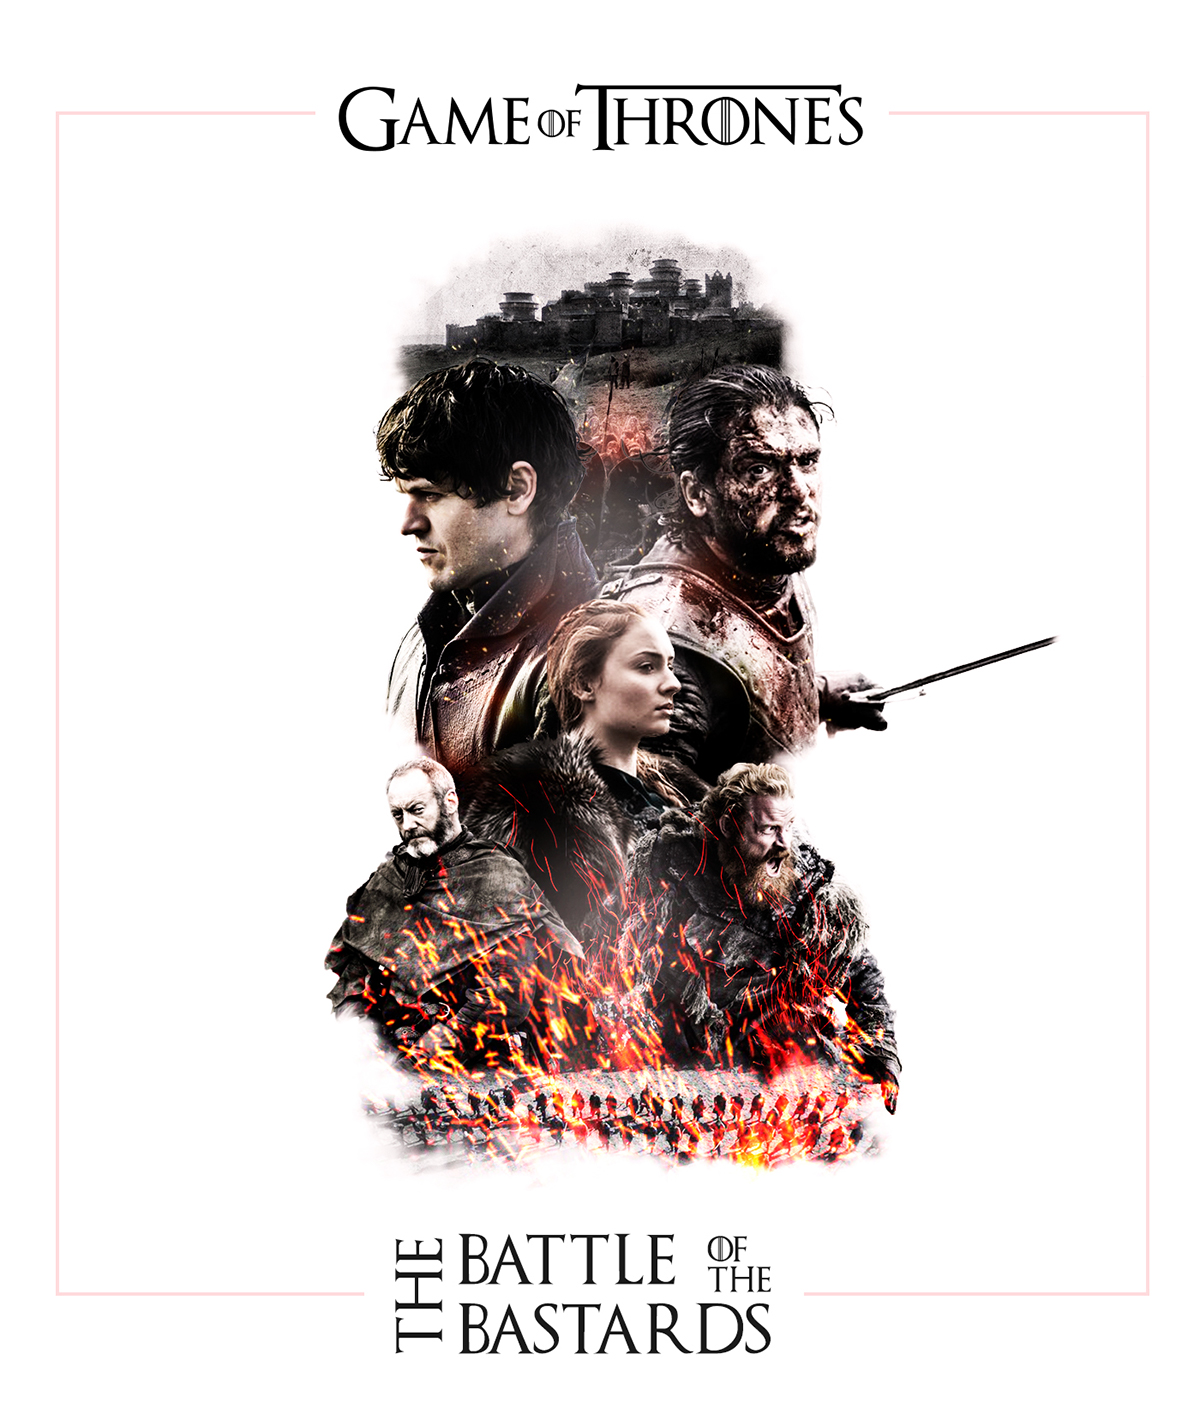 GAME OF THRONES POSTER Jon Snow Battle of the Bastards Poster Photo Print A3 A4 